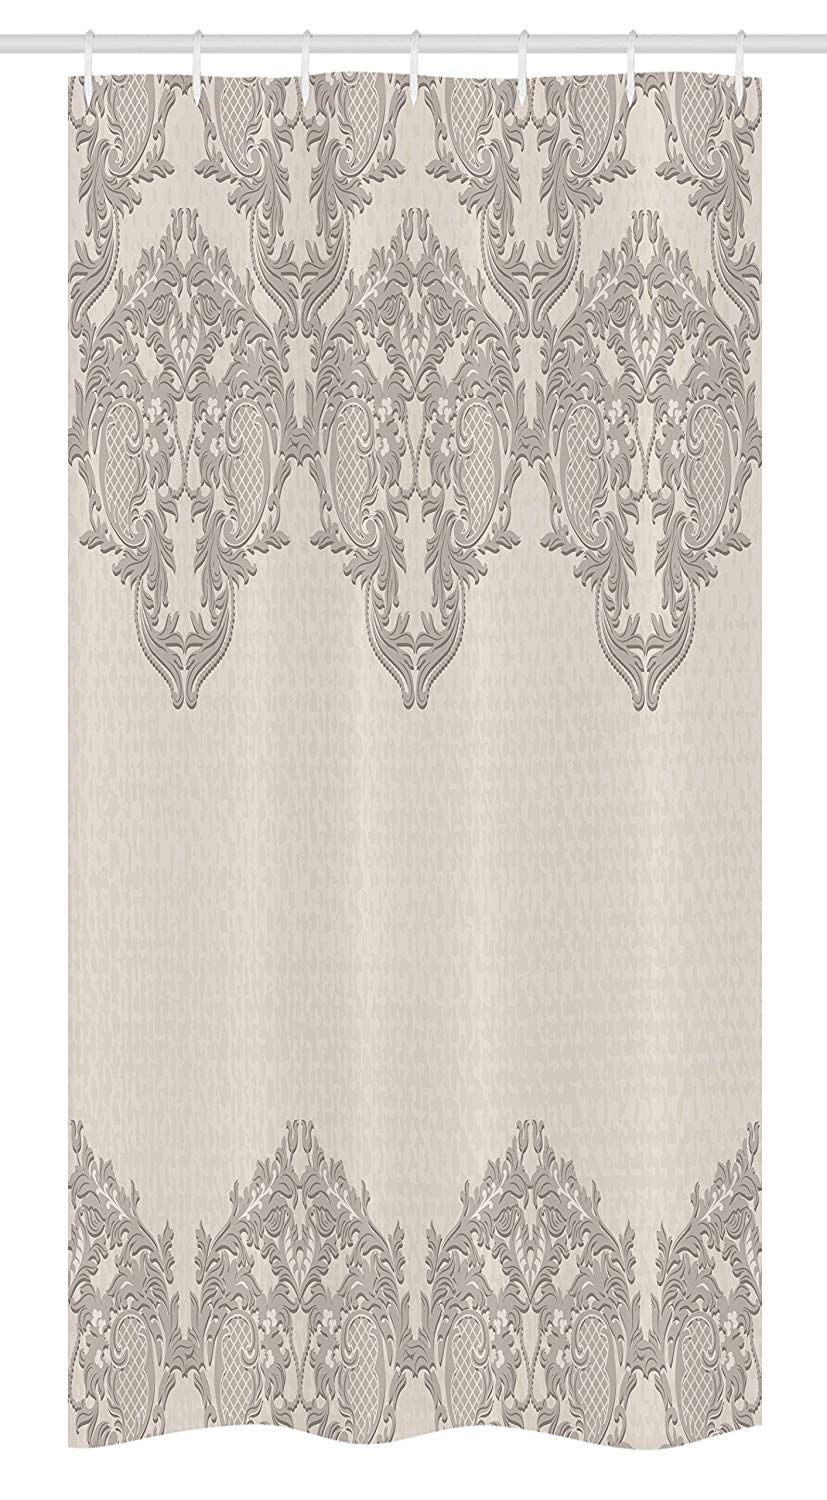 Ambesonne Taupe Stall Shower Curtain, Lace Like Framework Borders with Arabesque Details Delicate Intricate Retro Dated Print, Fabric Bathroom Decor Set with Hooks, 36 W x 72 L Inches, Taupe